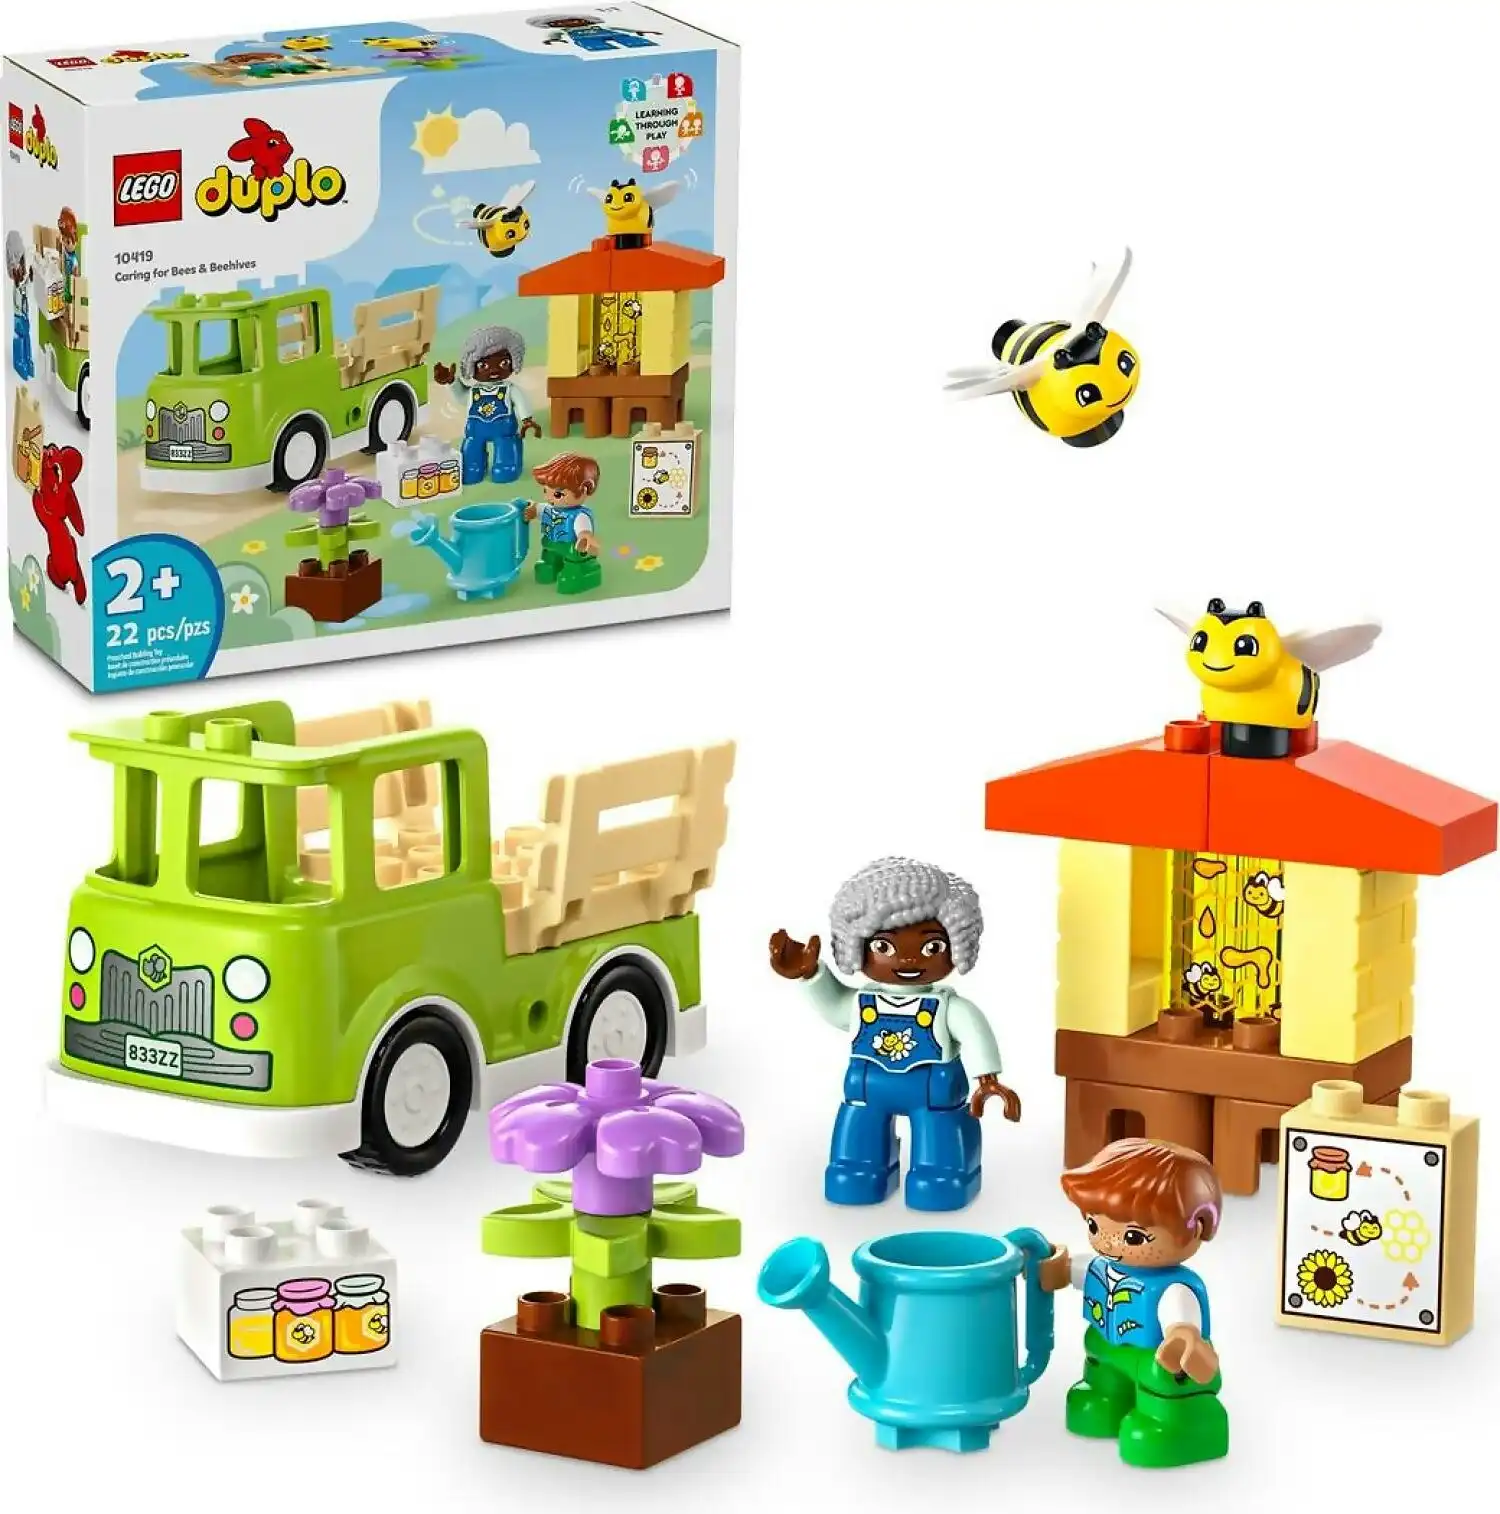 LEGO 10419 Caring for Bees & Beehives - Duplo